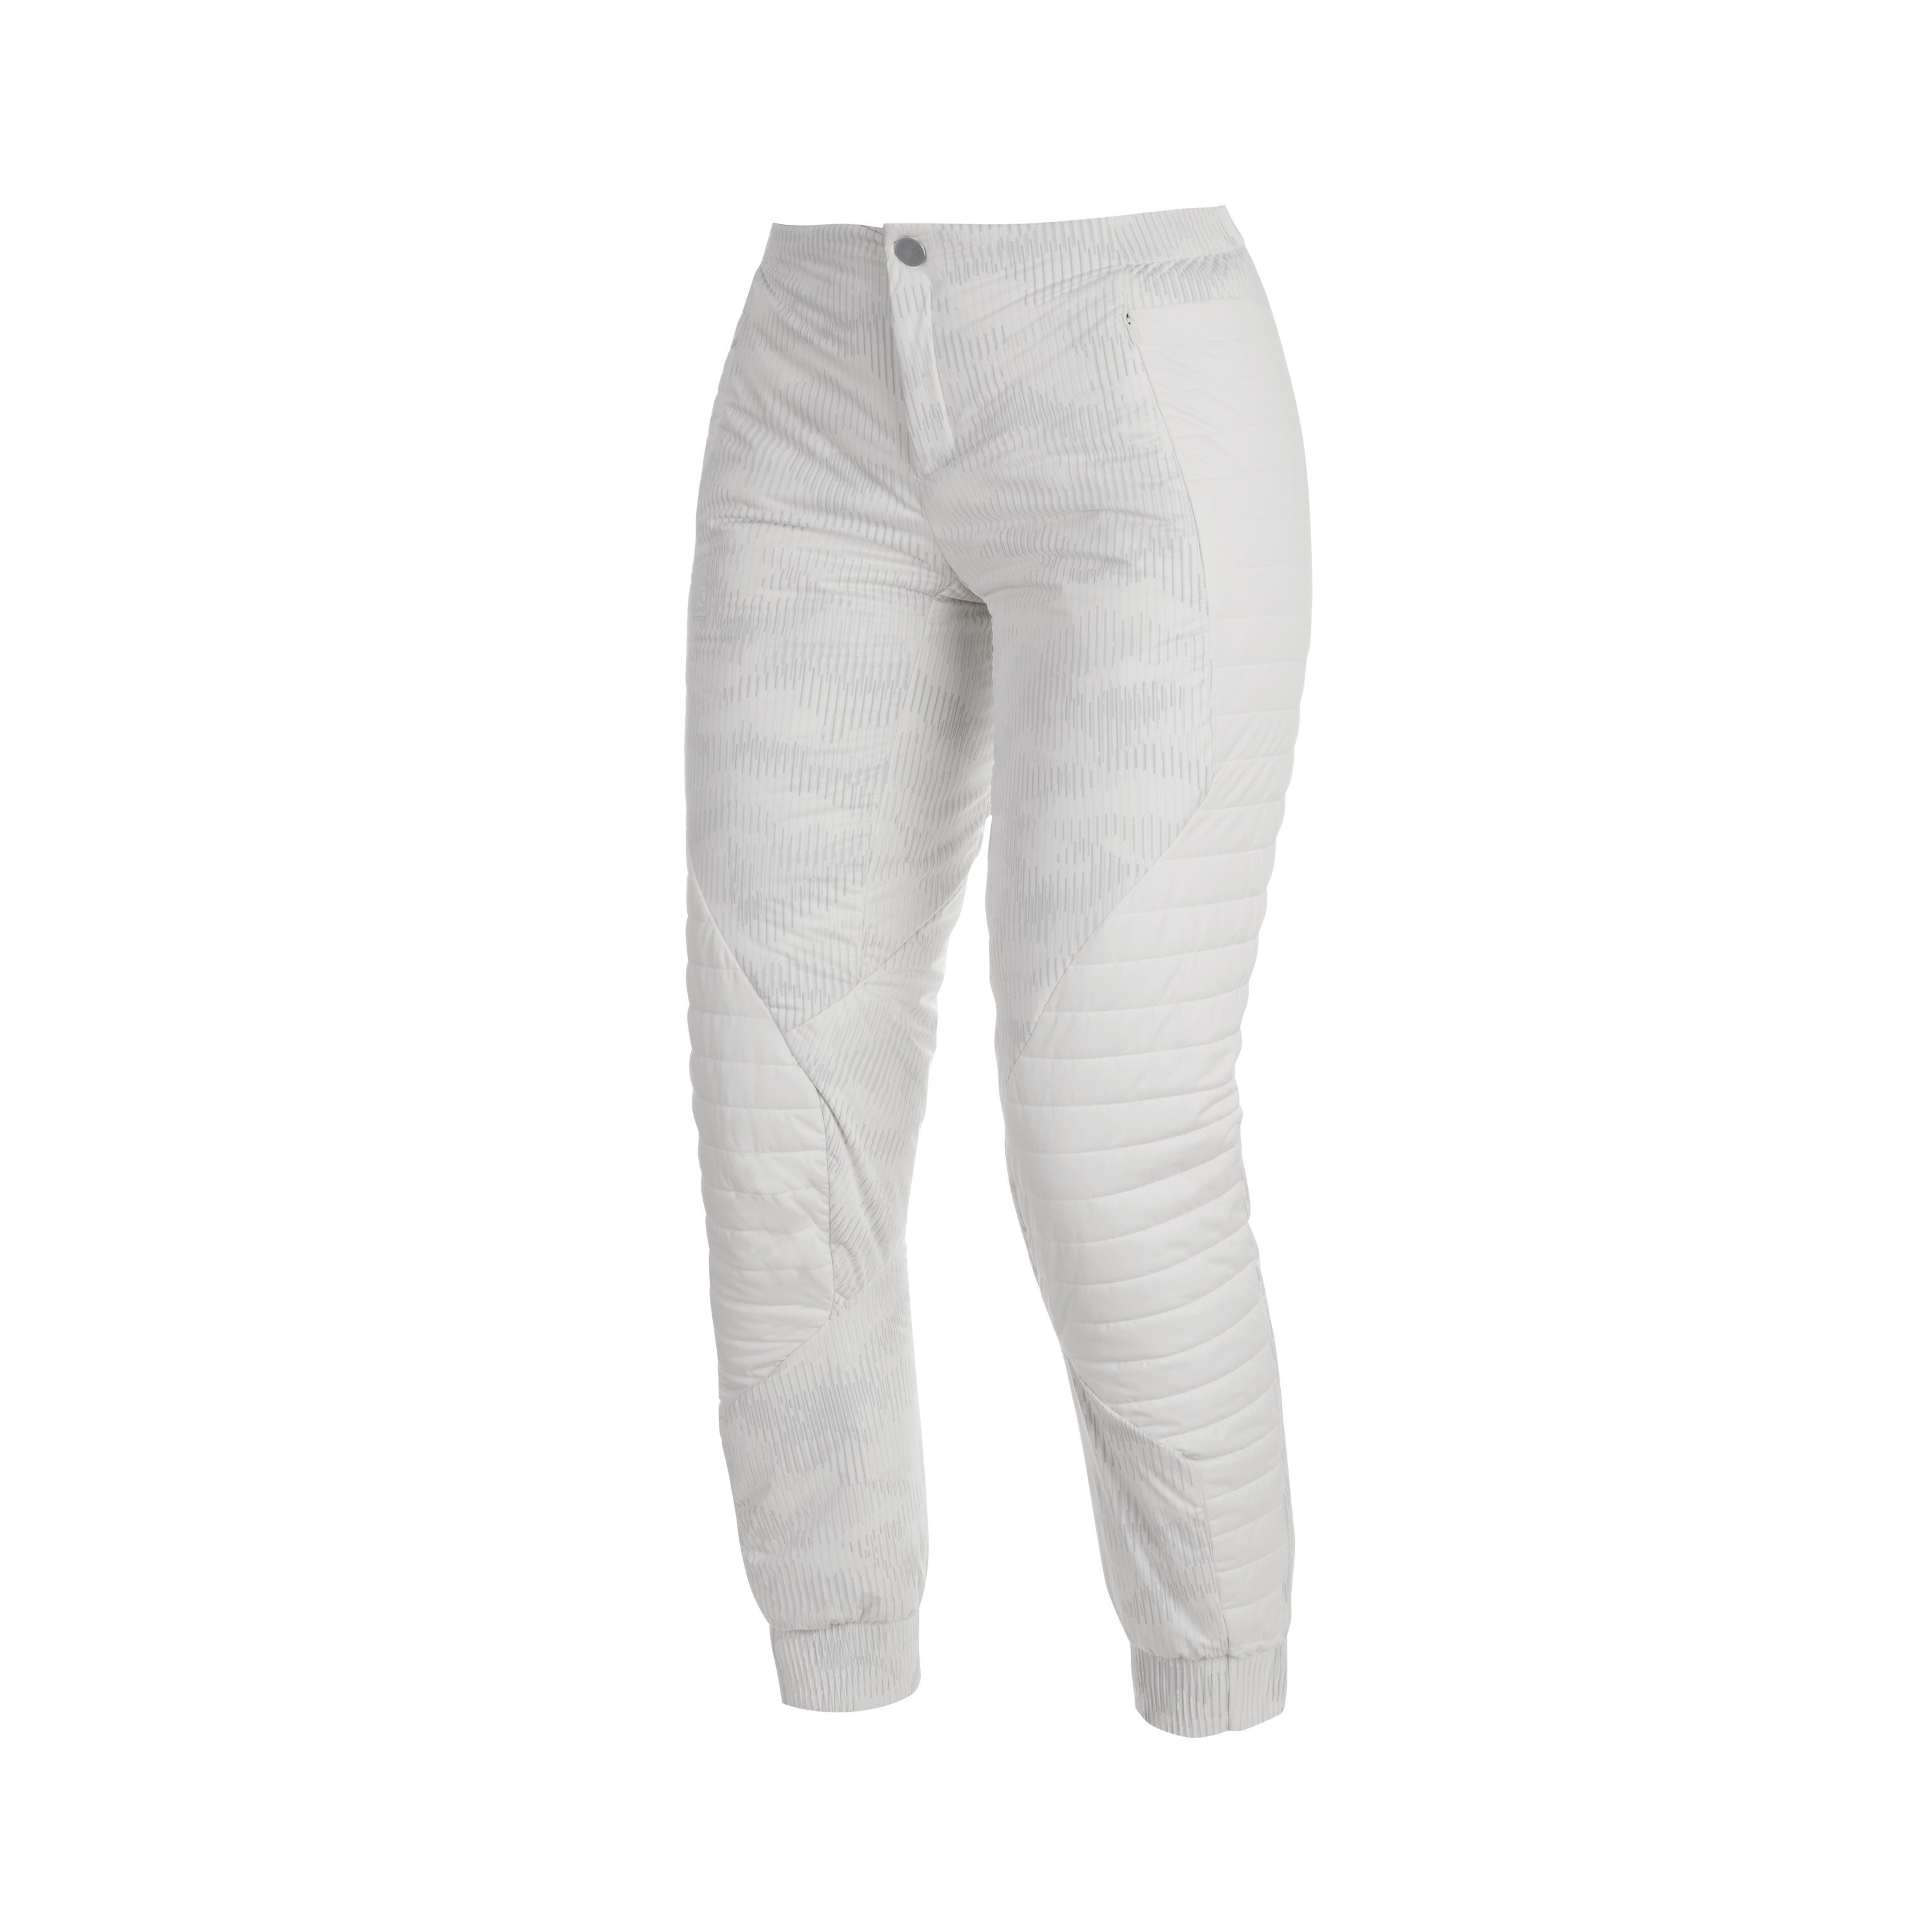 THE IN Pants - soft white camo, XS thumbnail